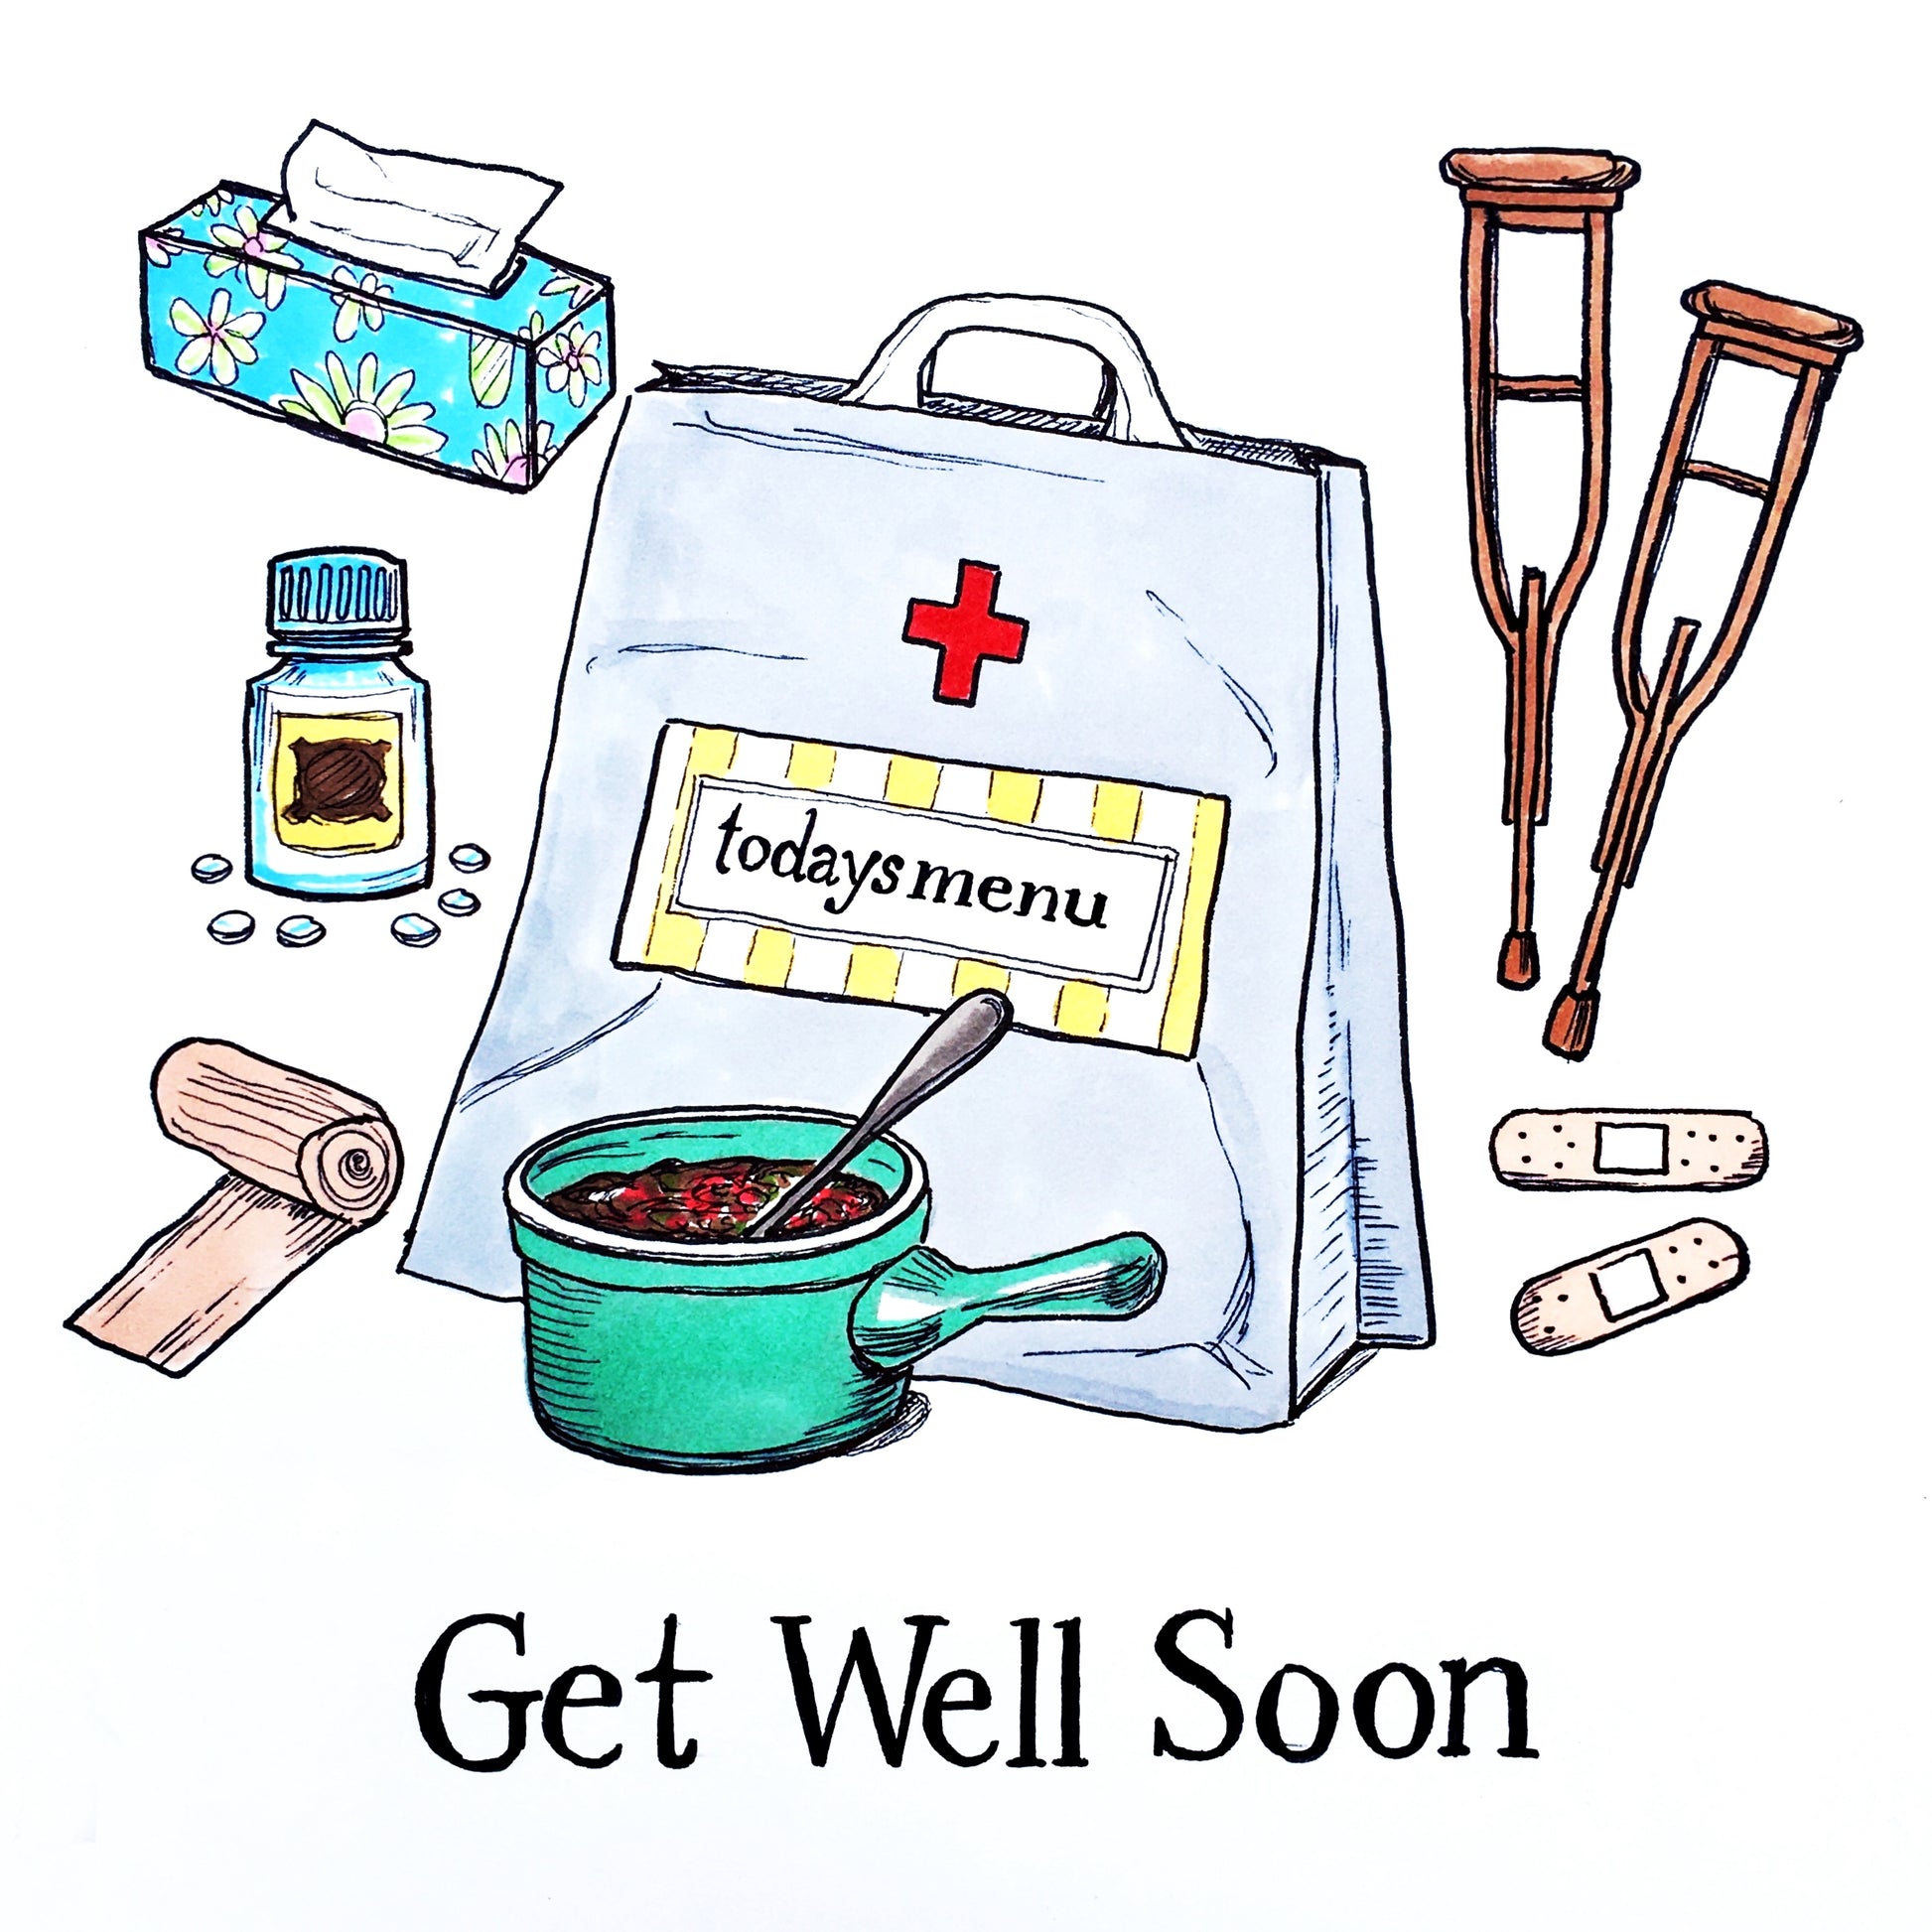 Get Well Soon (Serves 2) - Today's Menu